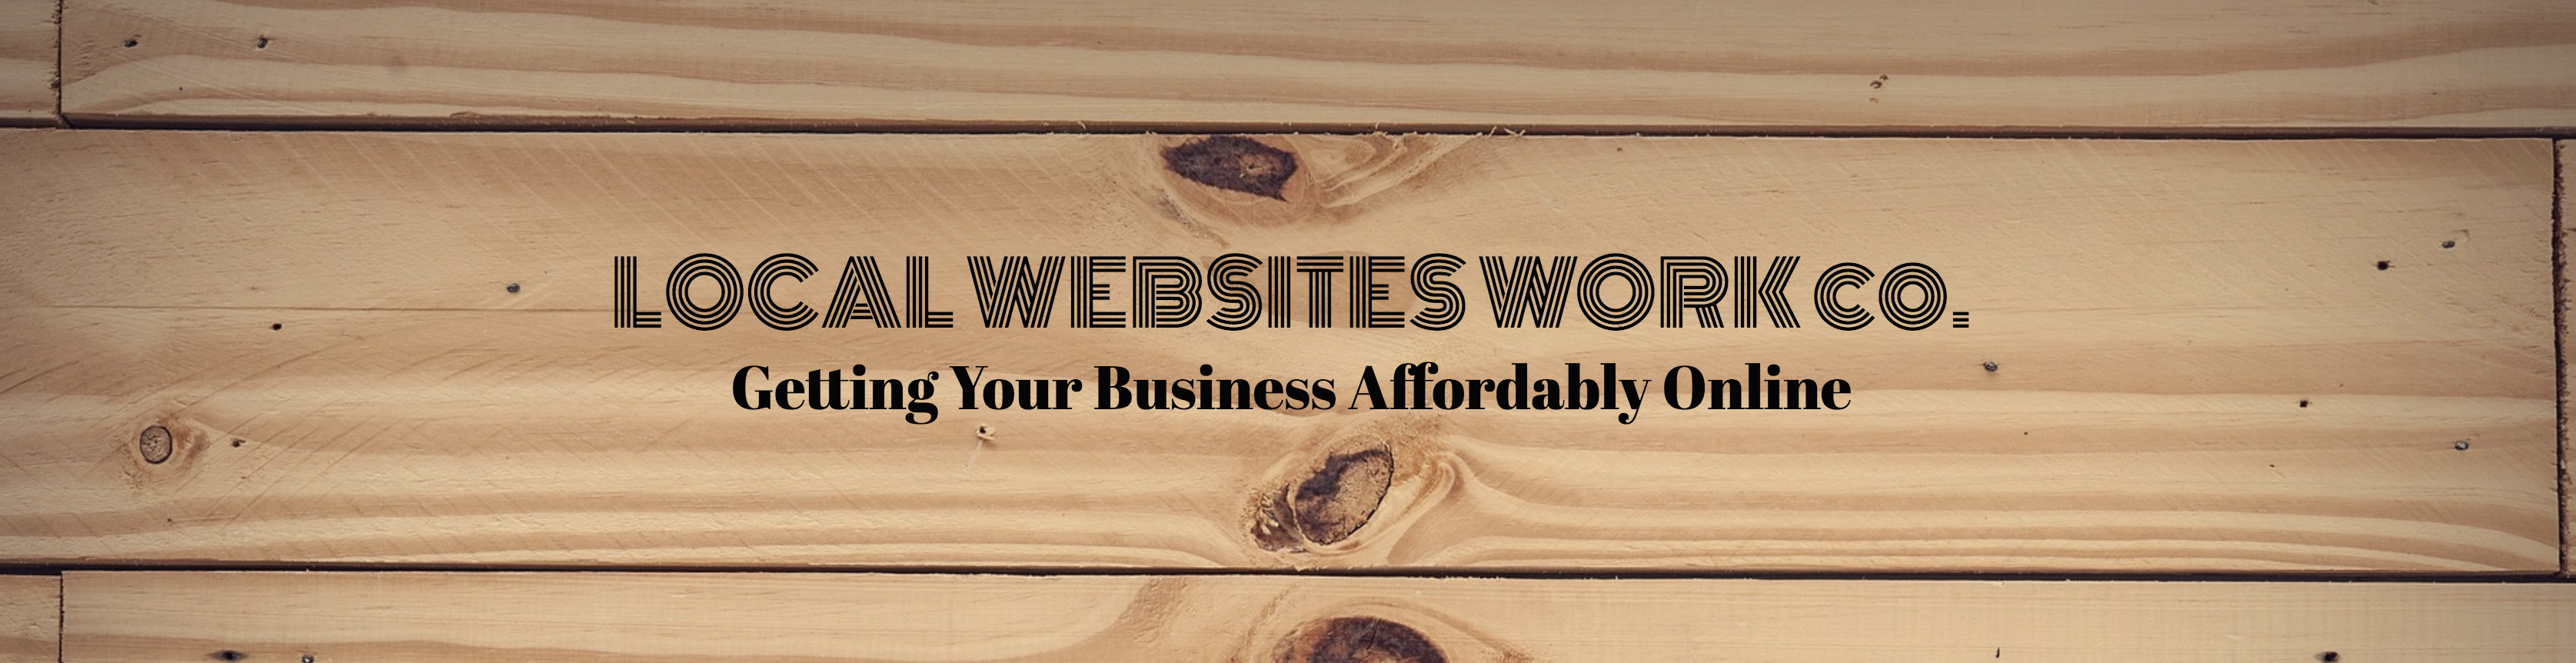 Local Websites Work Company - Houston, Cypress, Katy & The Woodlands (Live - Online)